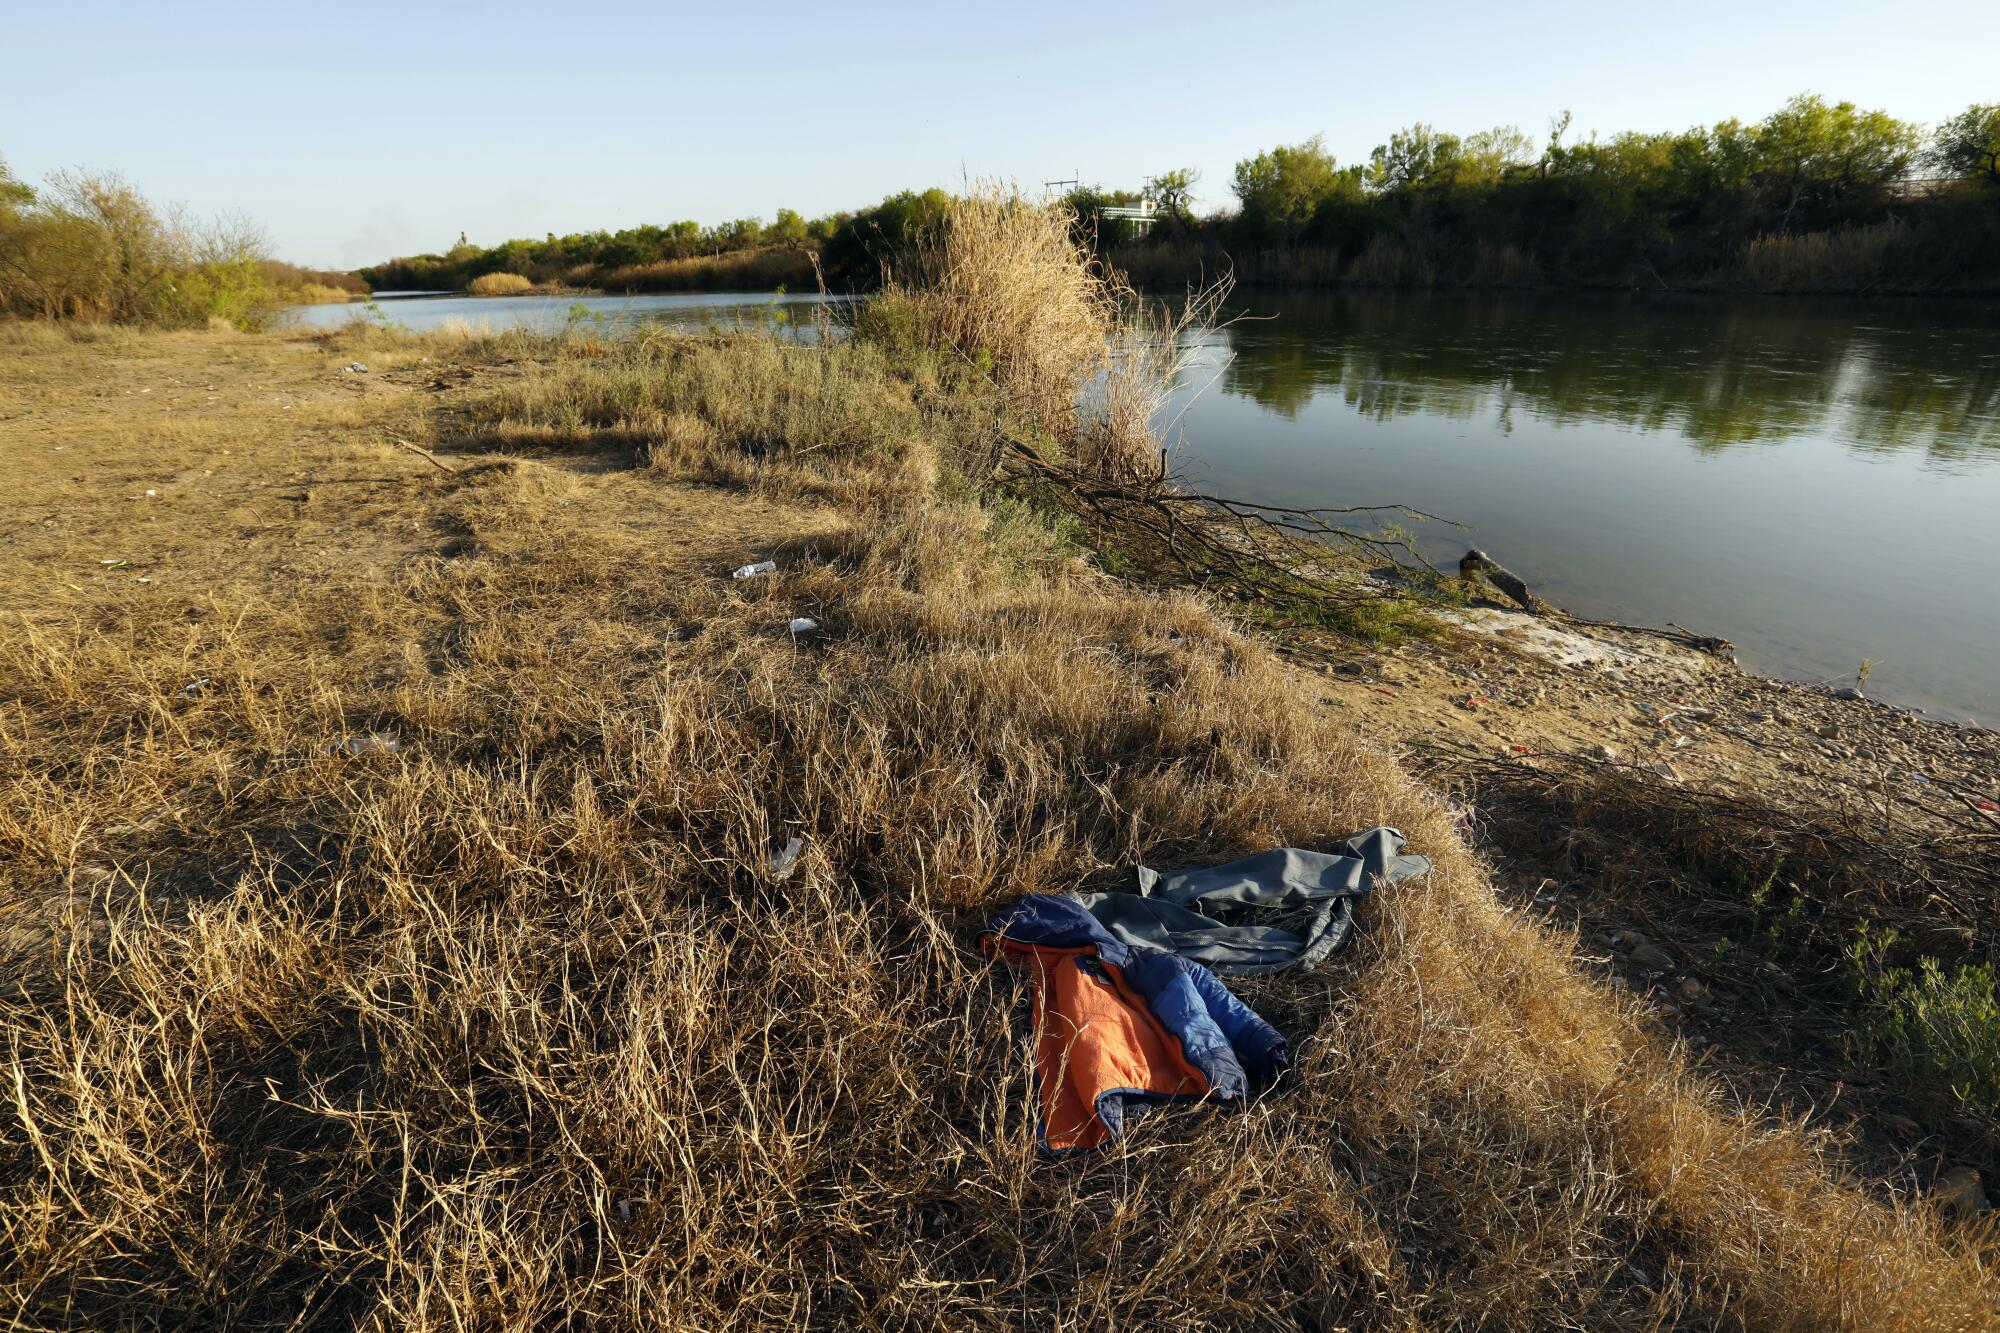 A child's jacket and pants in dry brush next to a riverbank